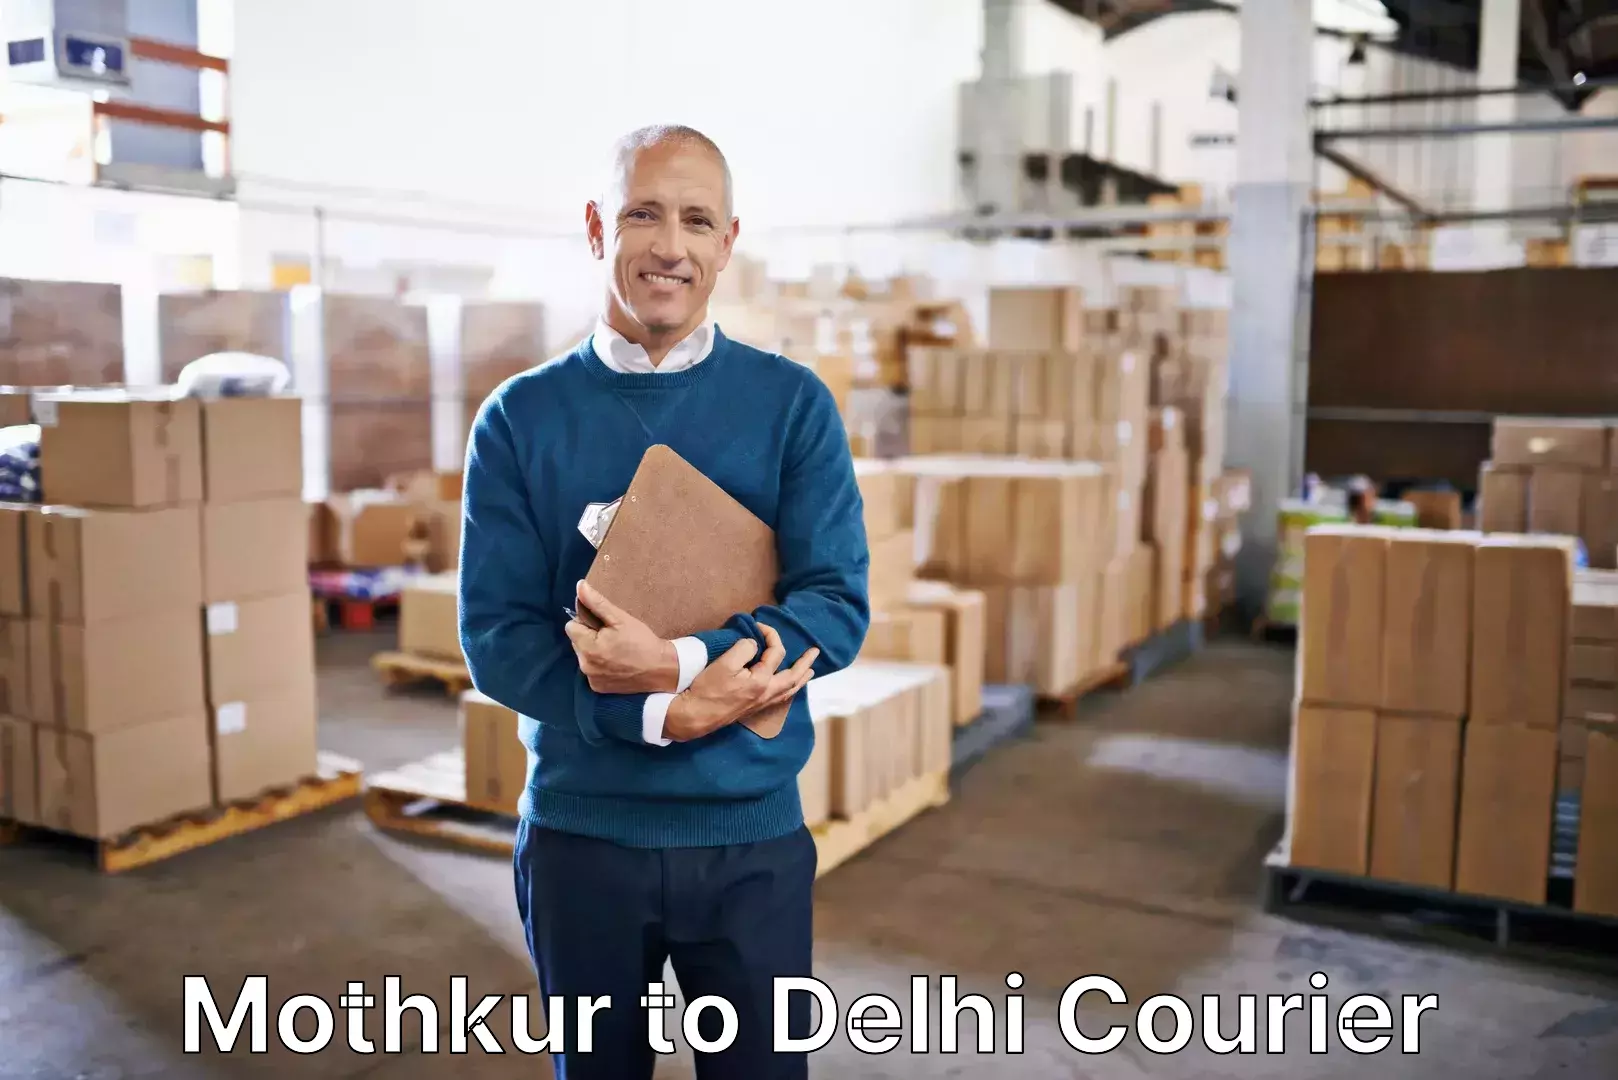 Luggage delivery network Mothkur to Delhi